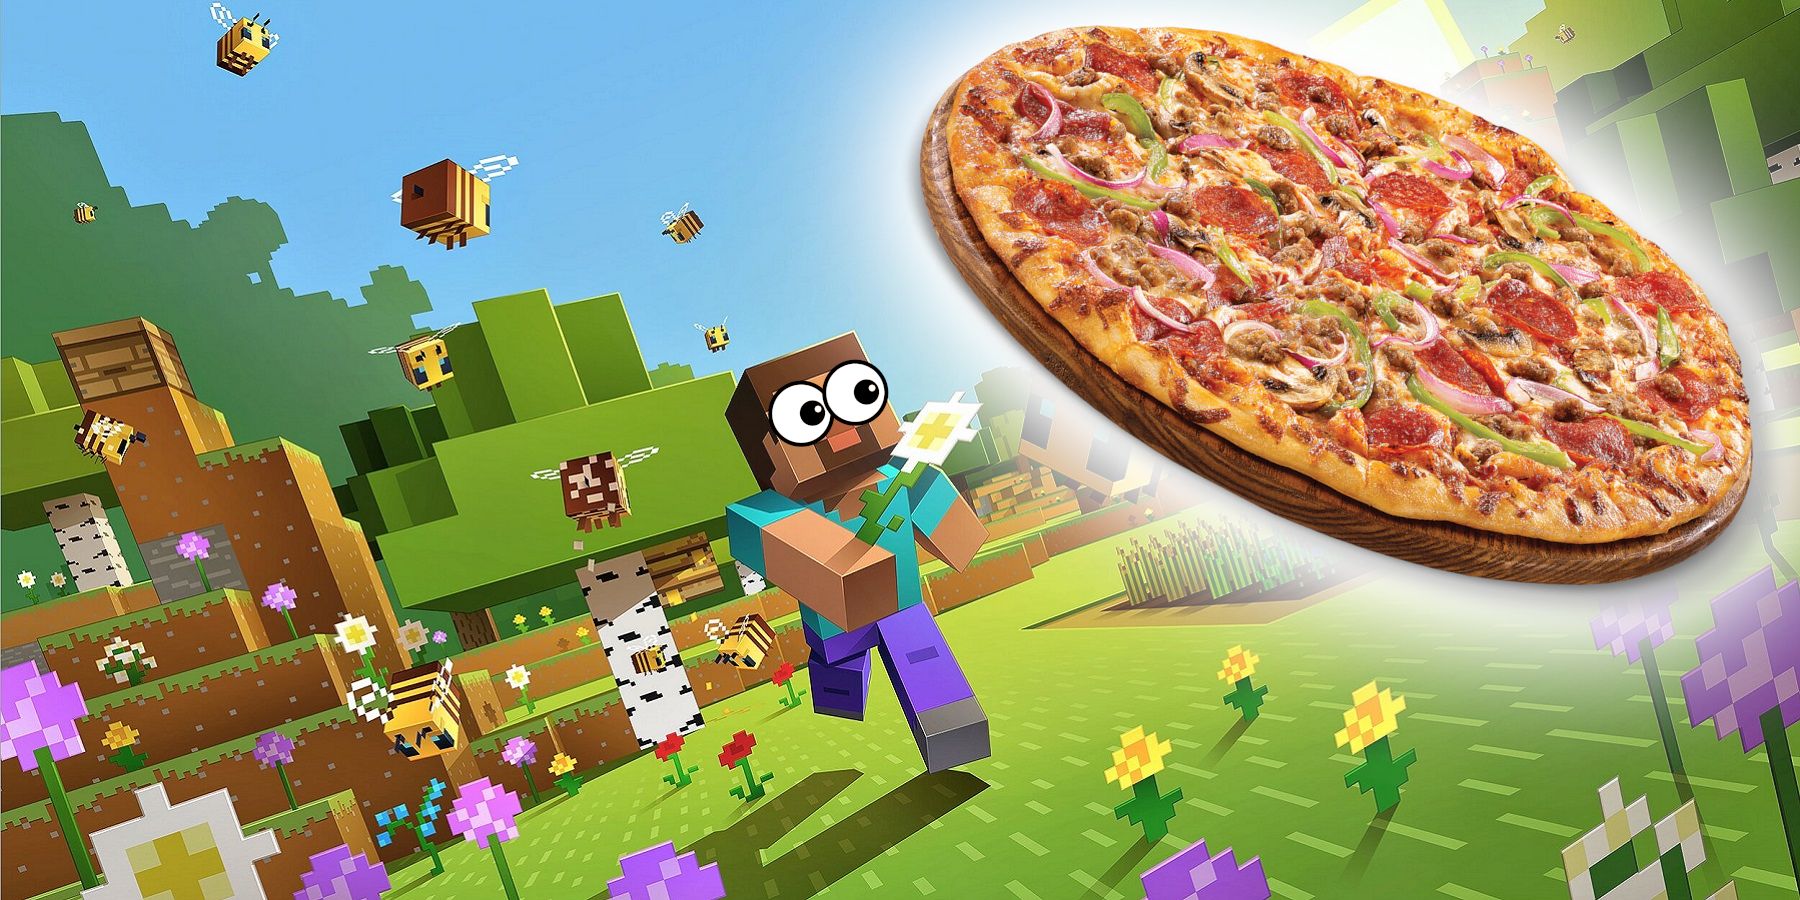 Image from Minecraft showing Steve looking at a giant floating pizza.